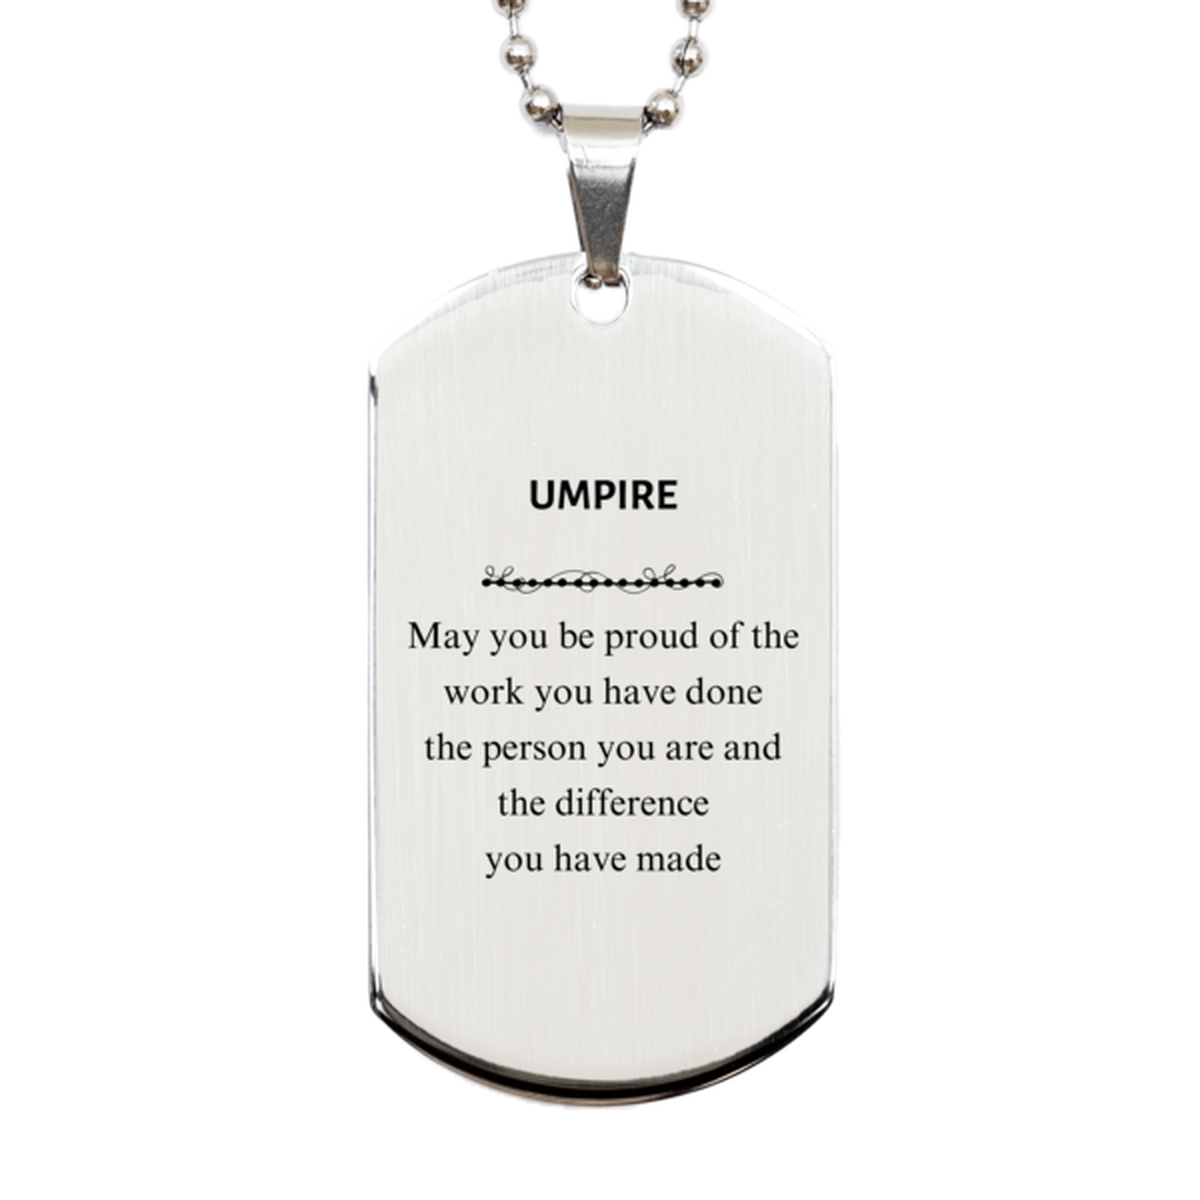 Umpire May you be proud of the work you have done, Retirement Umpire Silver Dog Tag for Colleague Appreciation Gifts Amazing for Umpire